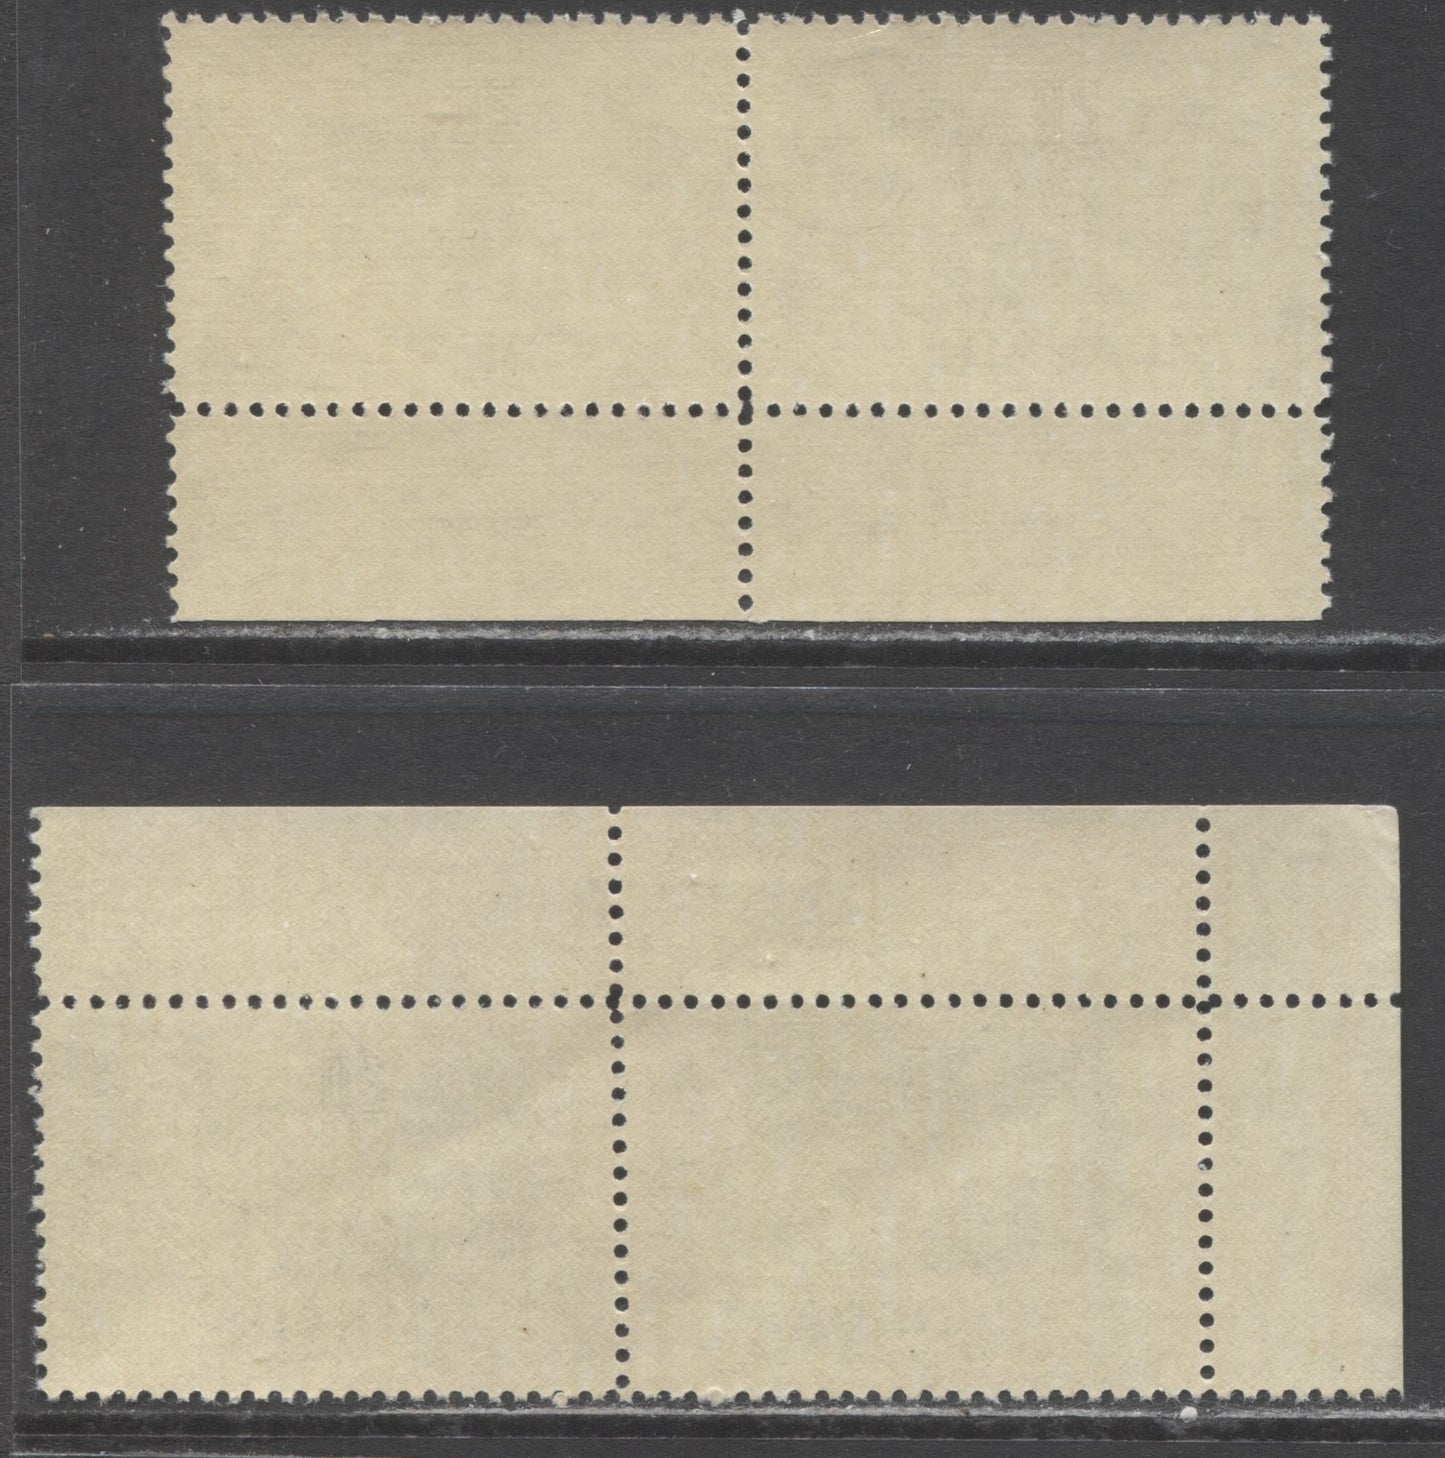 Lot 207 Canada #316 20c Slate Paper Mill, 1952-1956 Industry Definitives, 2 VFNH Plate 1 & 2 Inscription Pairs, Bluish Grey & Paler Bluish Grey Shades